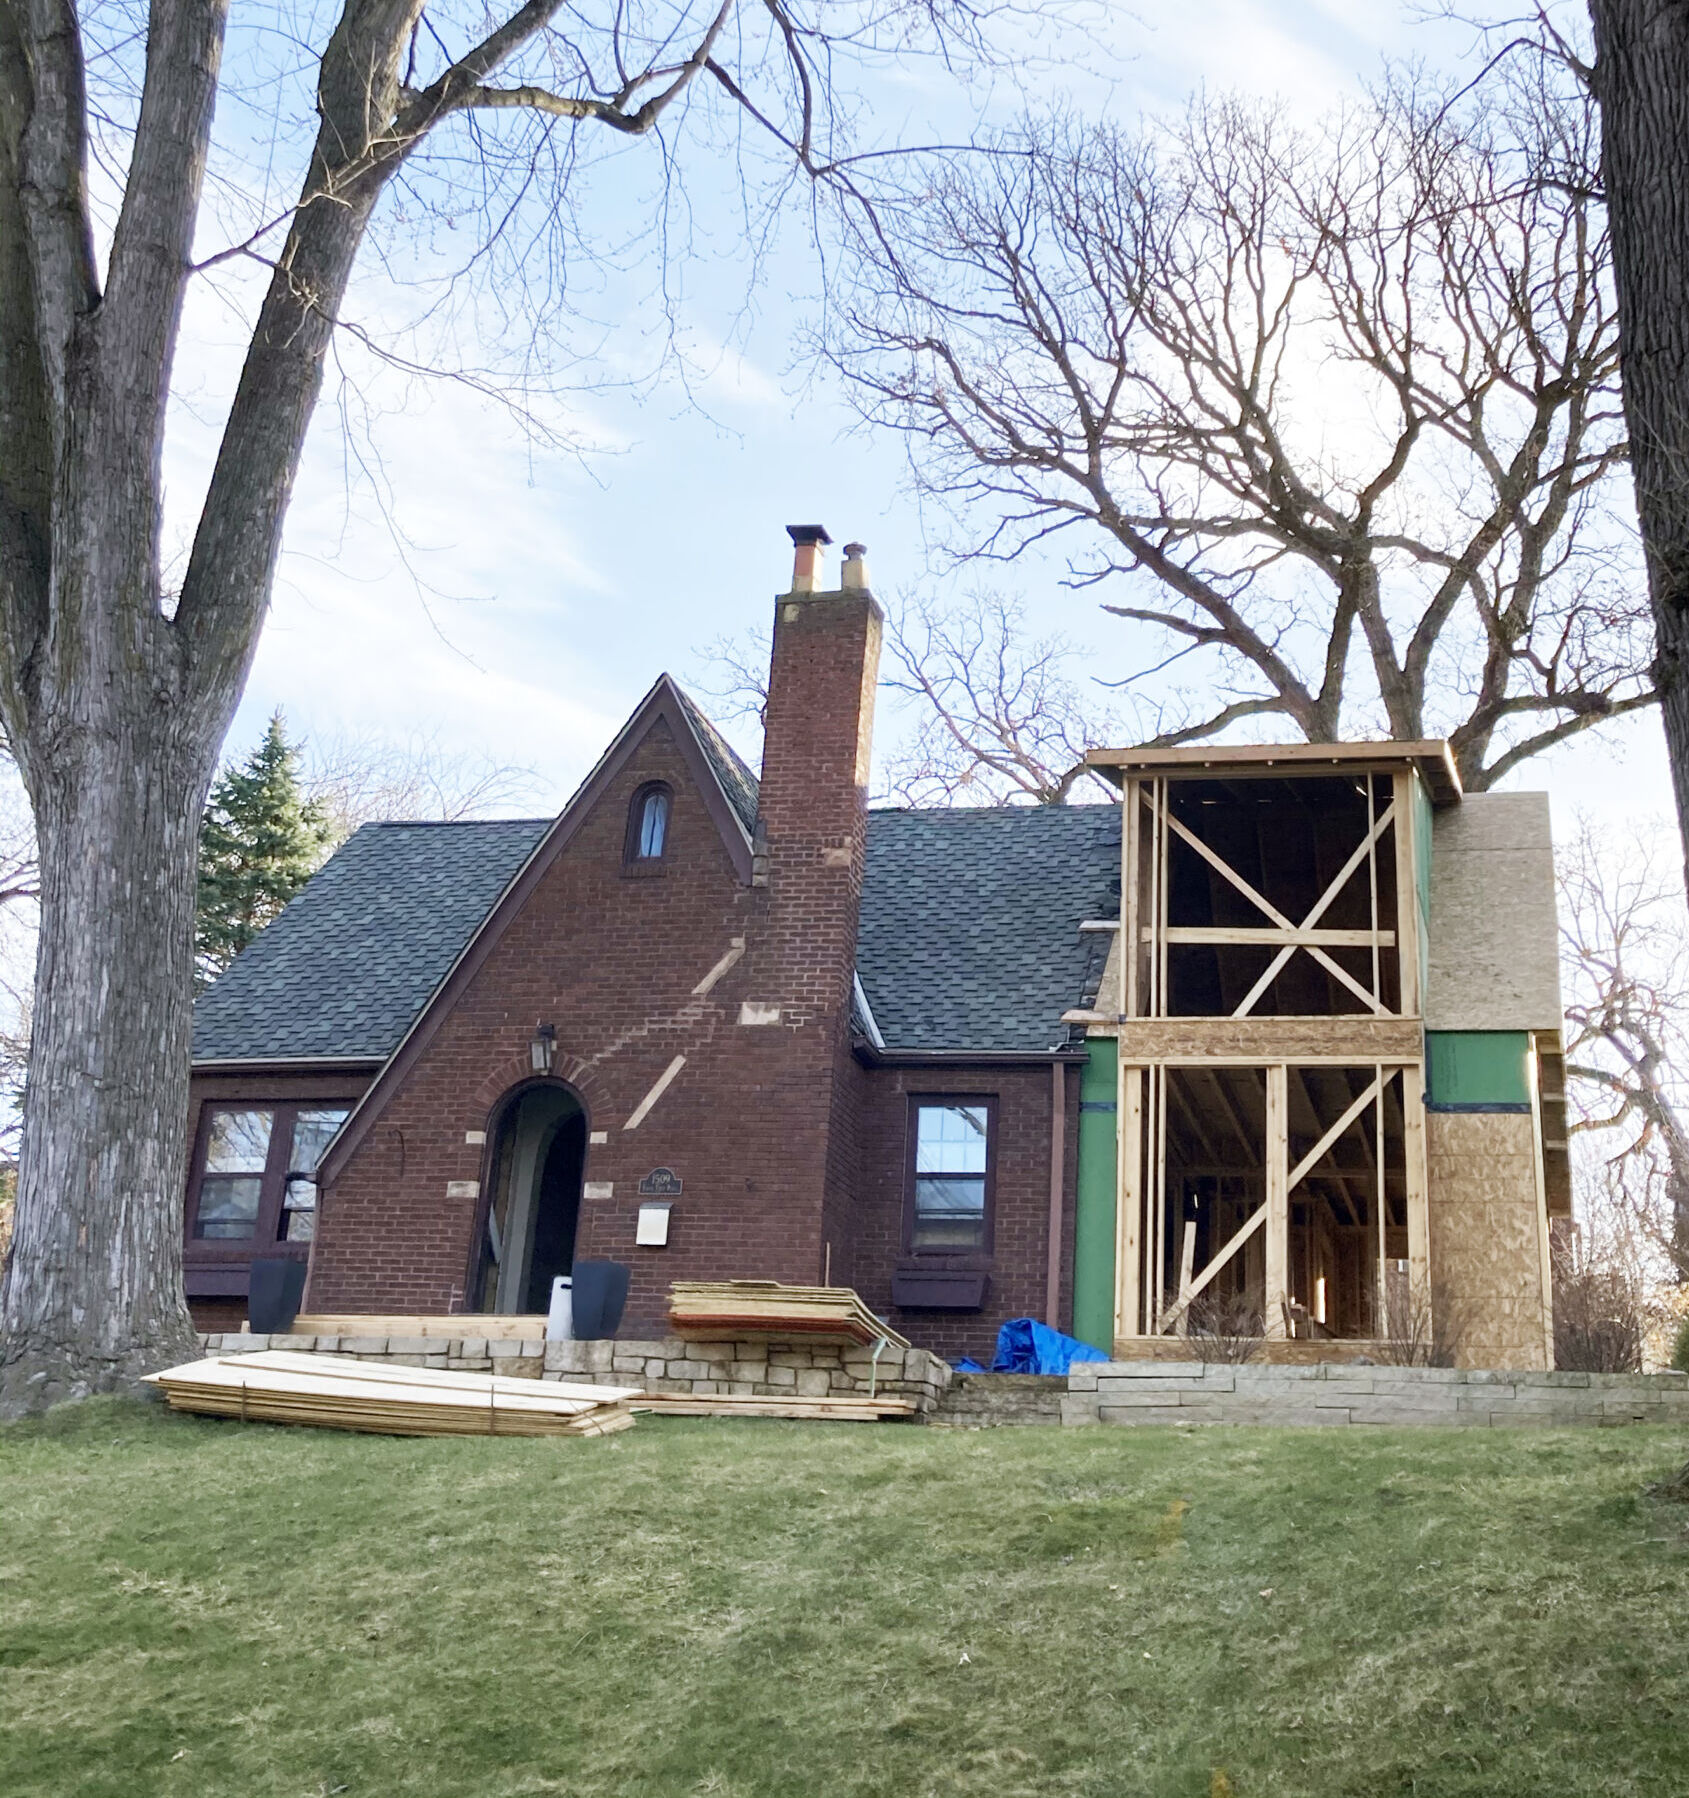 New addition in progress on brick home